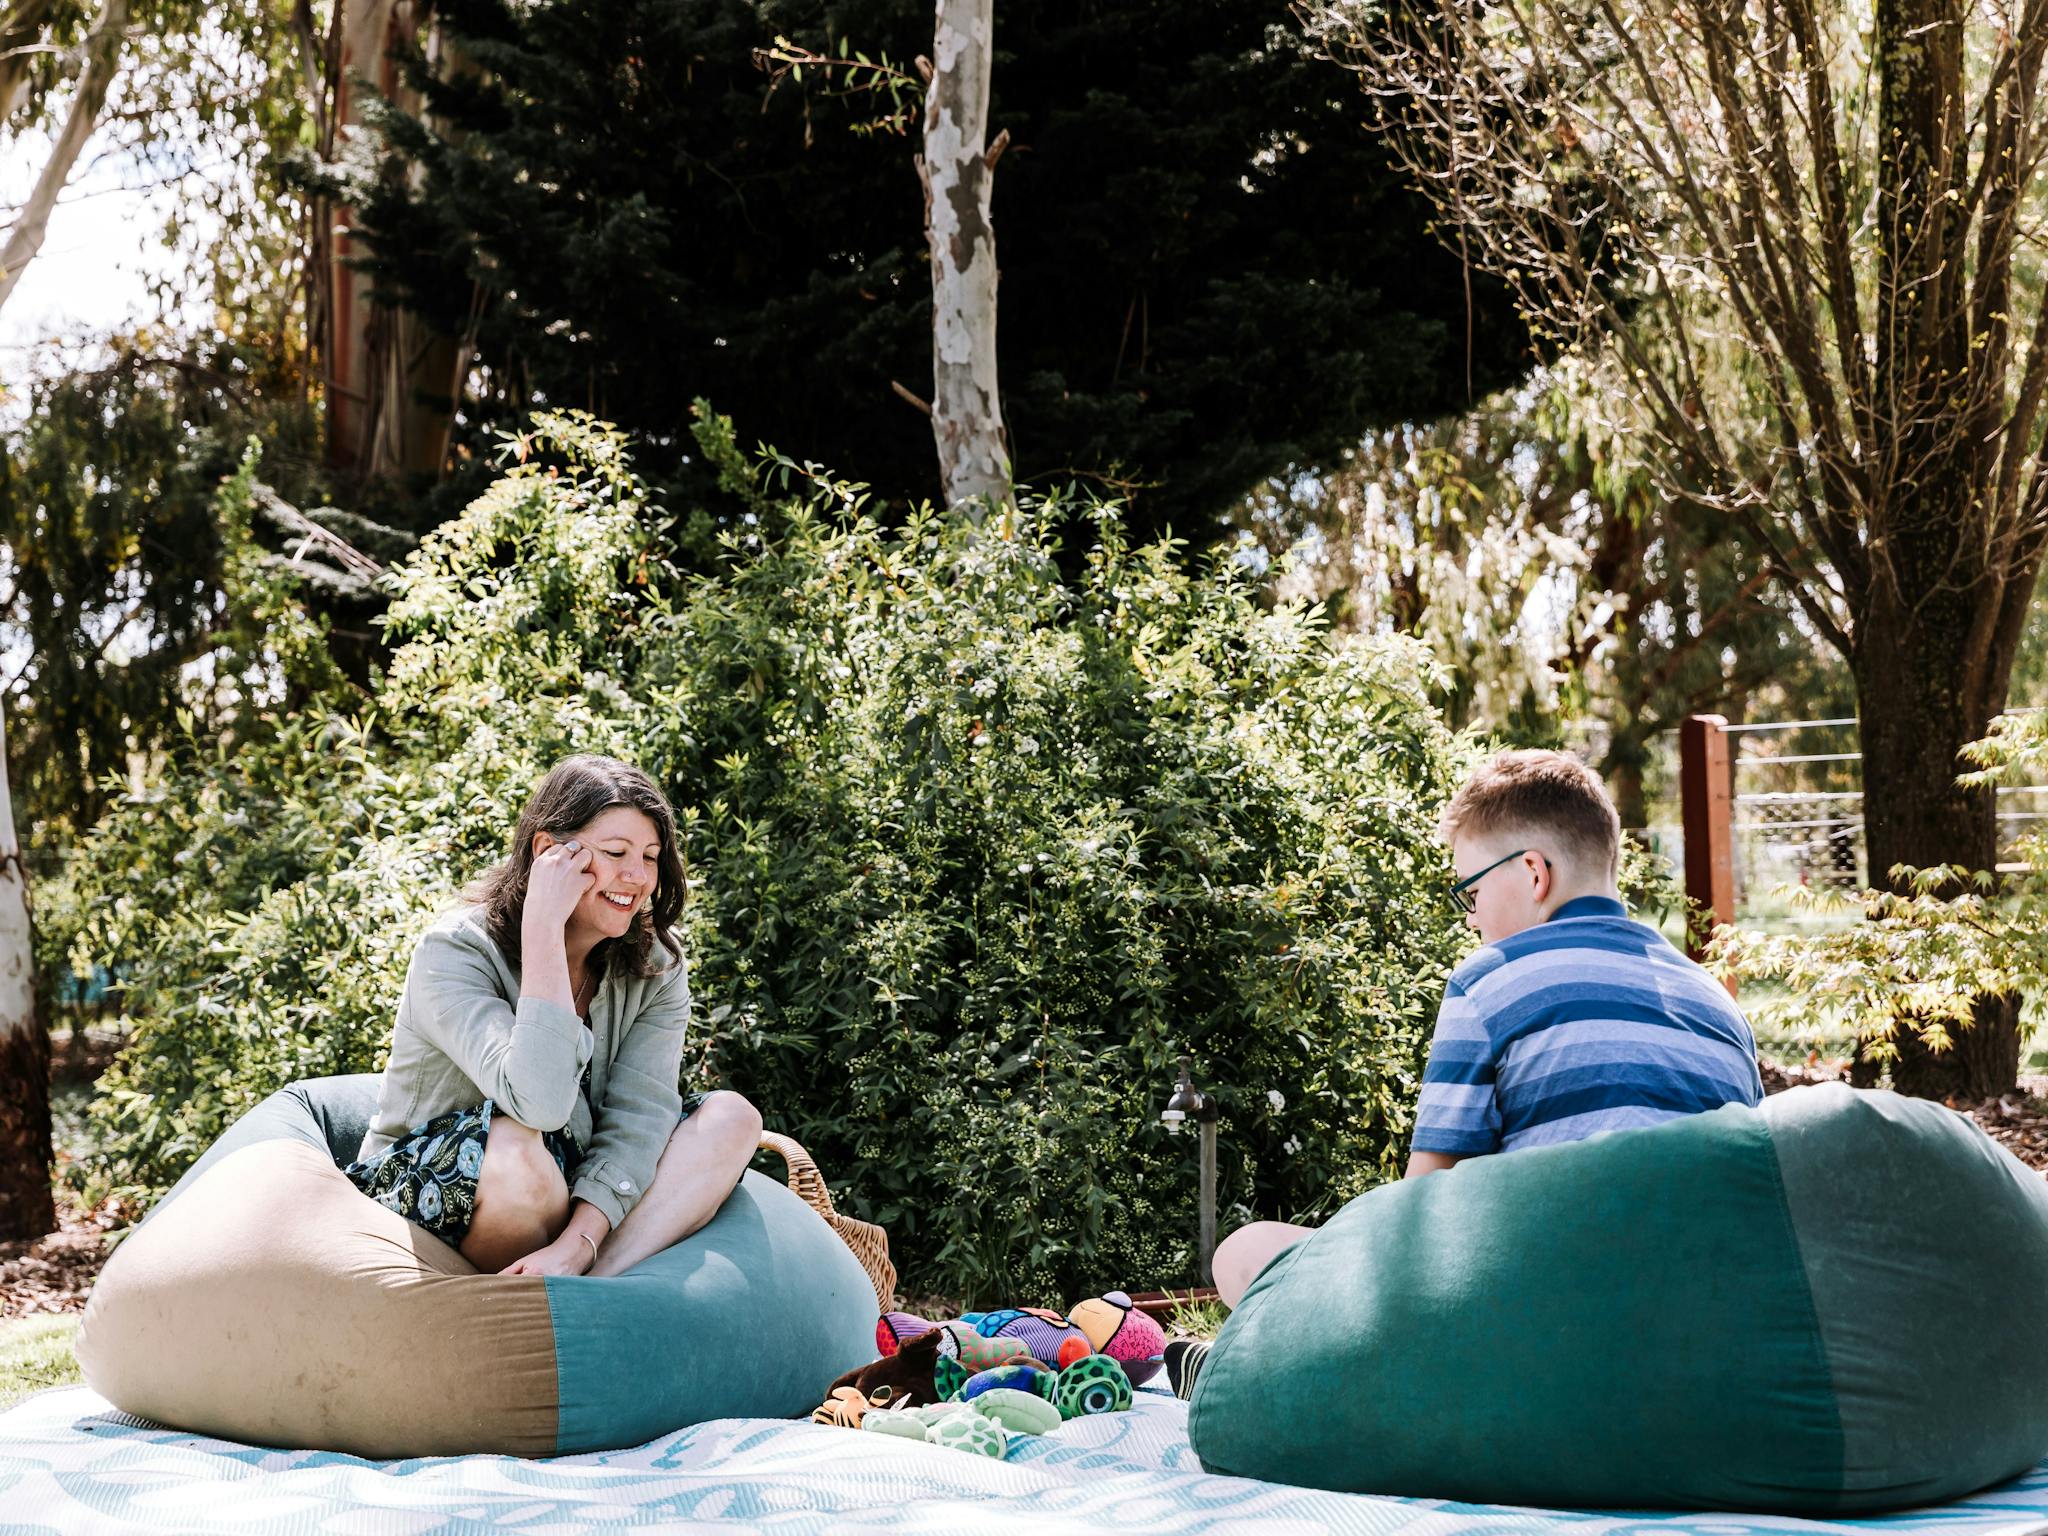 Young person therapy outdoors in bean bags